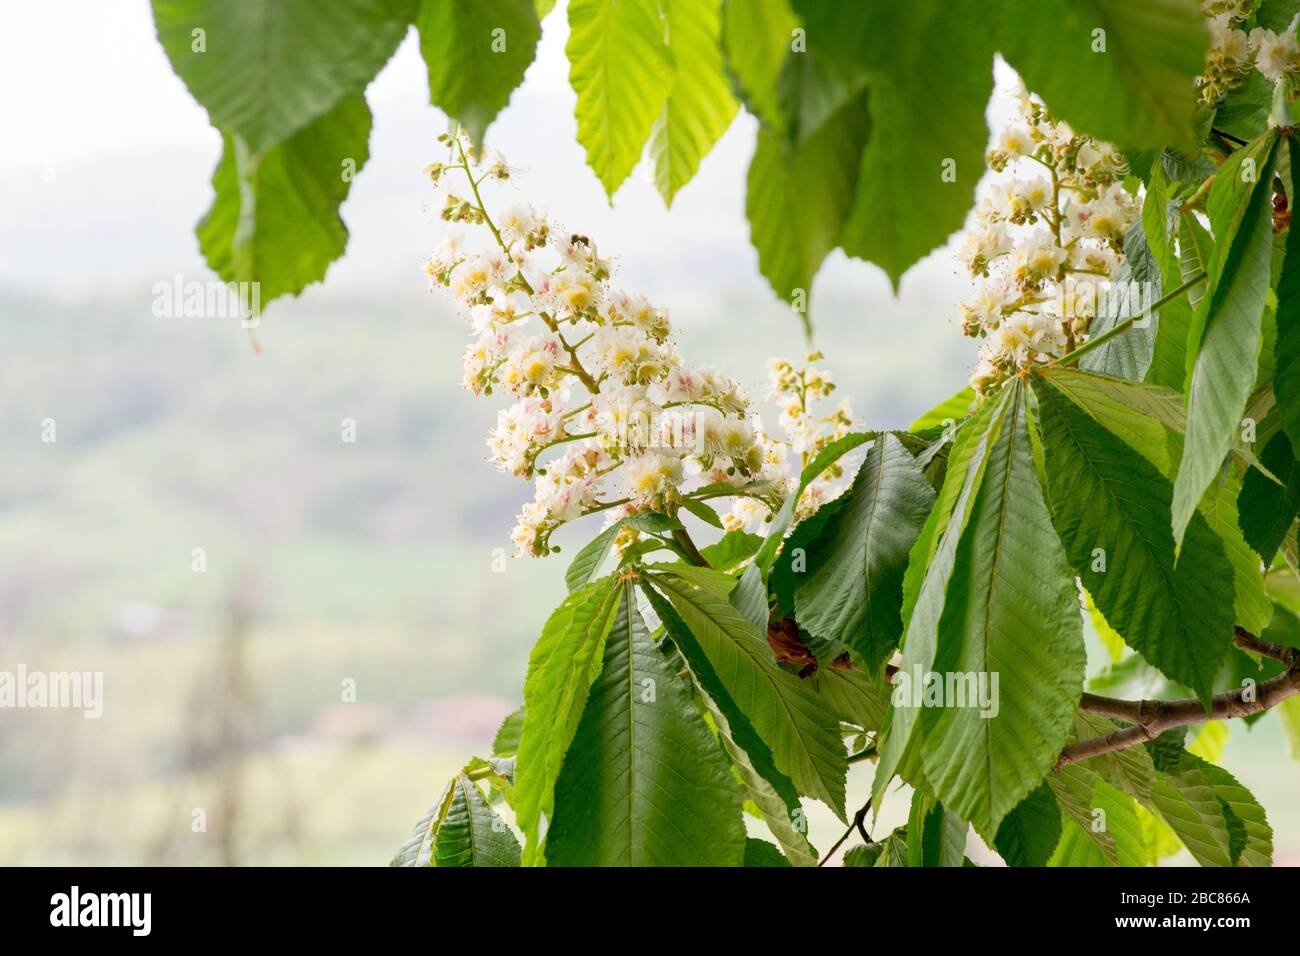 A green branch of a horse chestnut tree full of fresh white flowers just budded in spring time in Italy Stock Photo